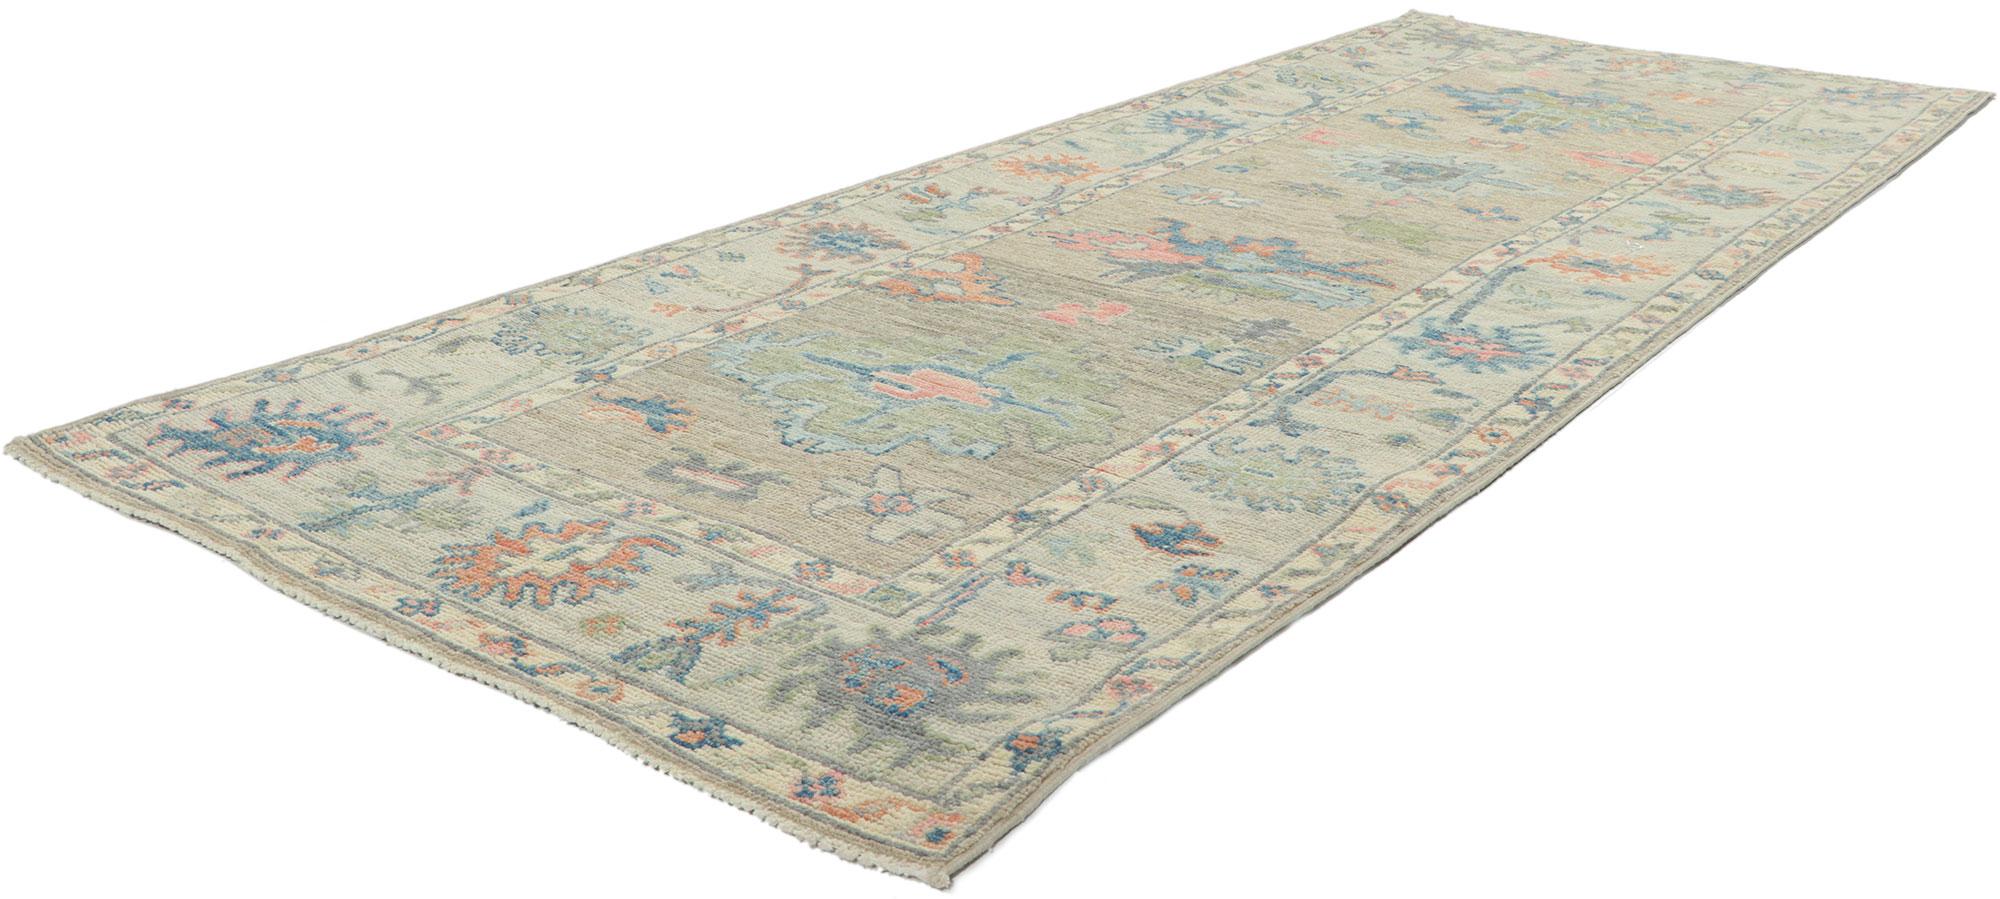 80856 new modern style oushak Runner with soft colors, 03'00 x 07'10. Serene and sophisticated, this hand-knotted wool contemporary Contemporary Oushak runner beautifully embodies a modern style. The composition features an all-over botanical